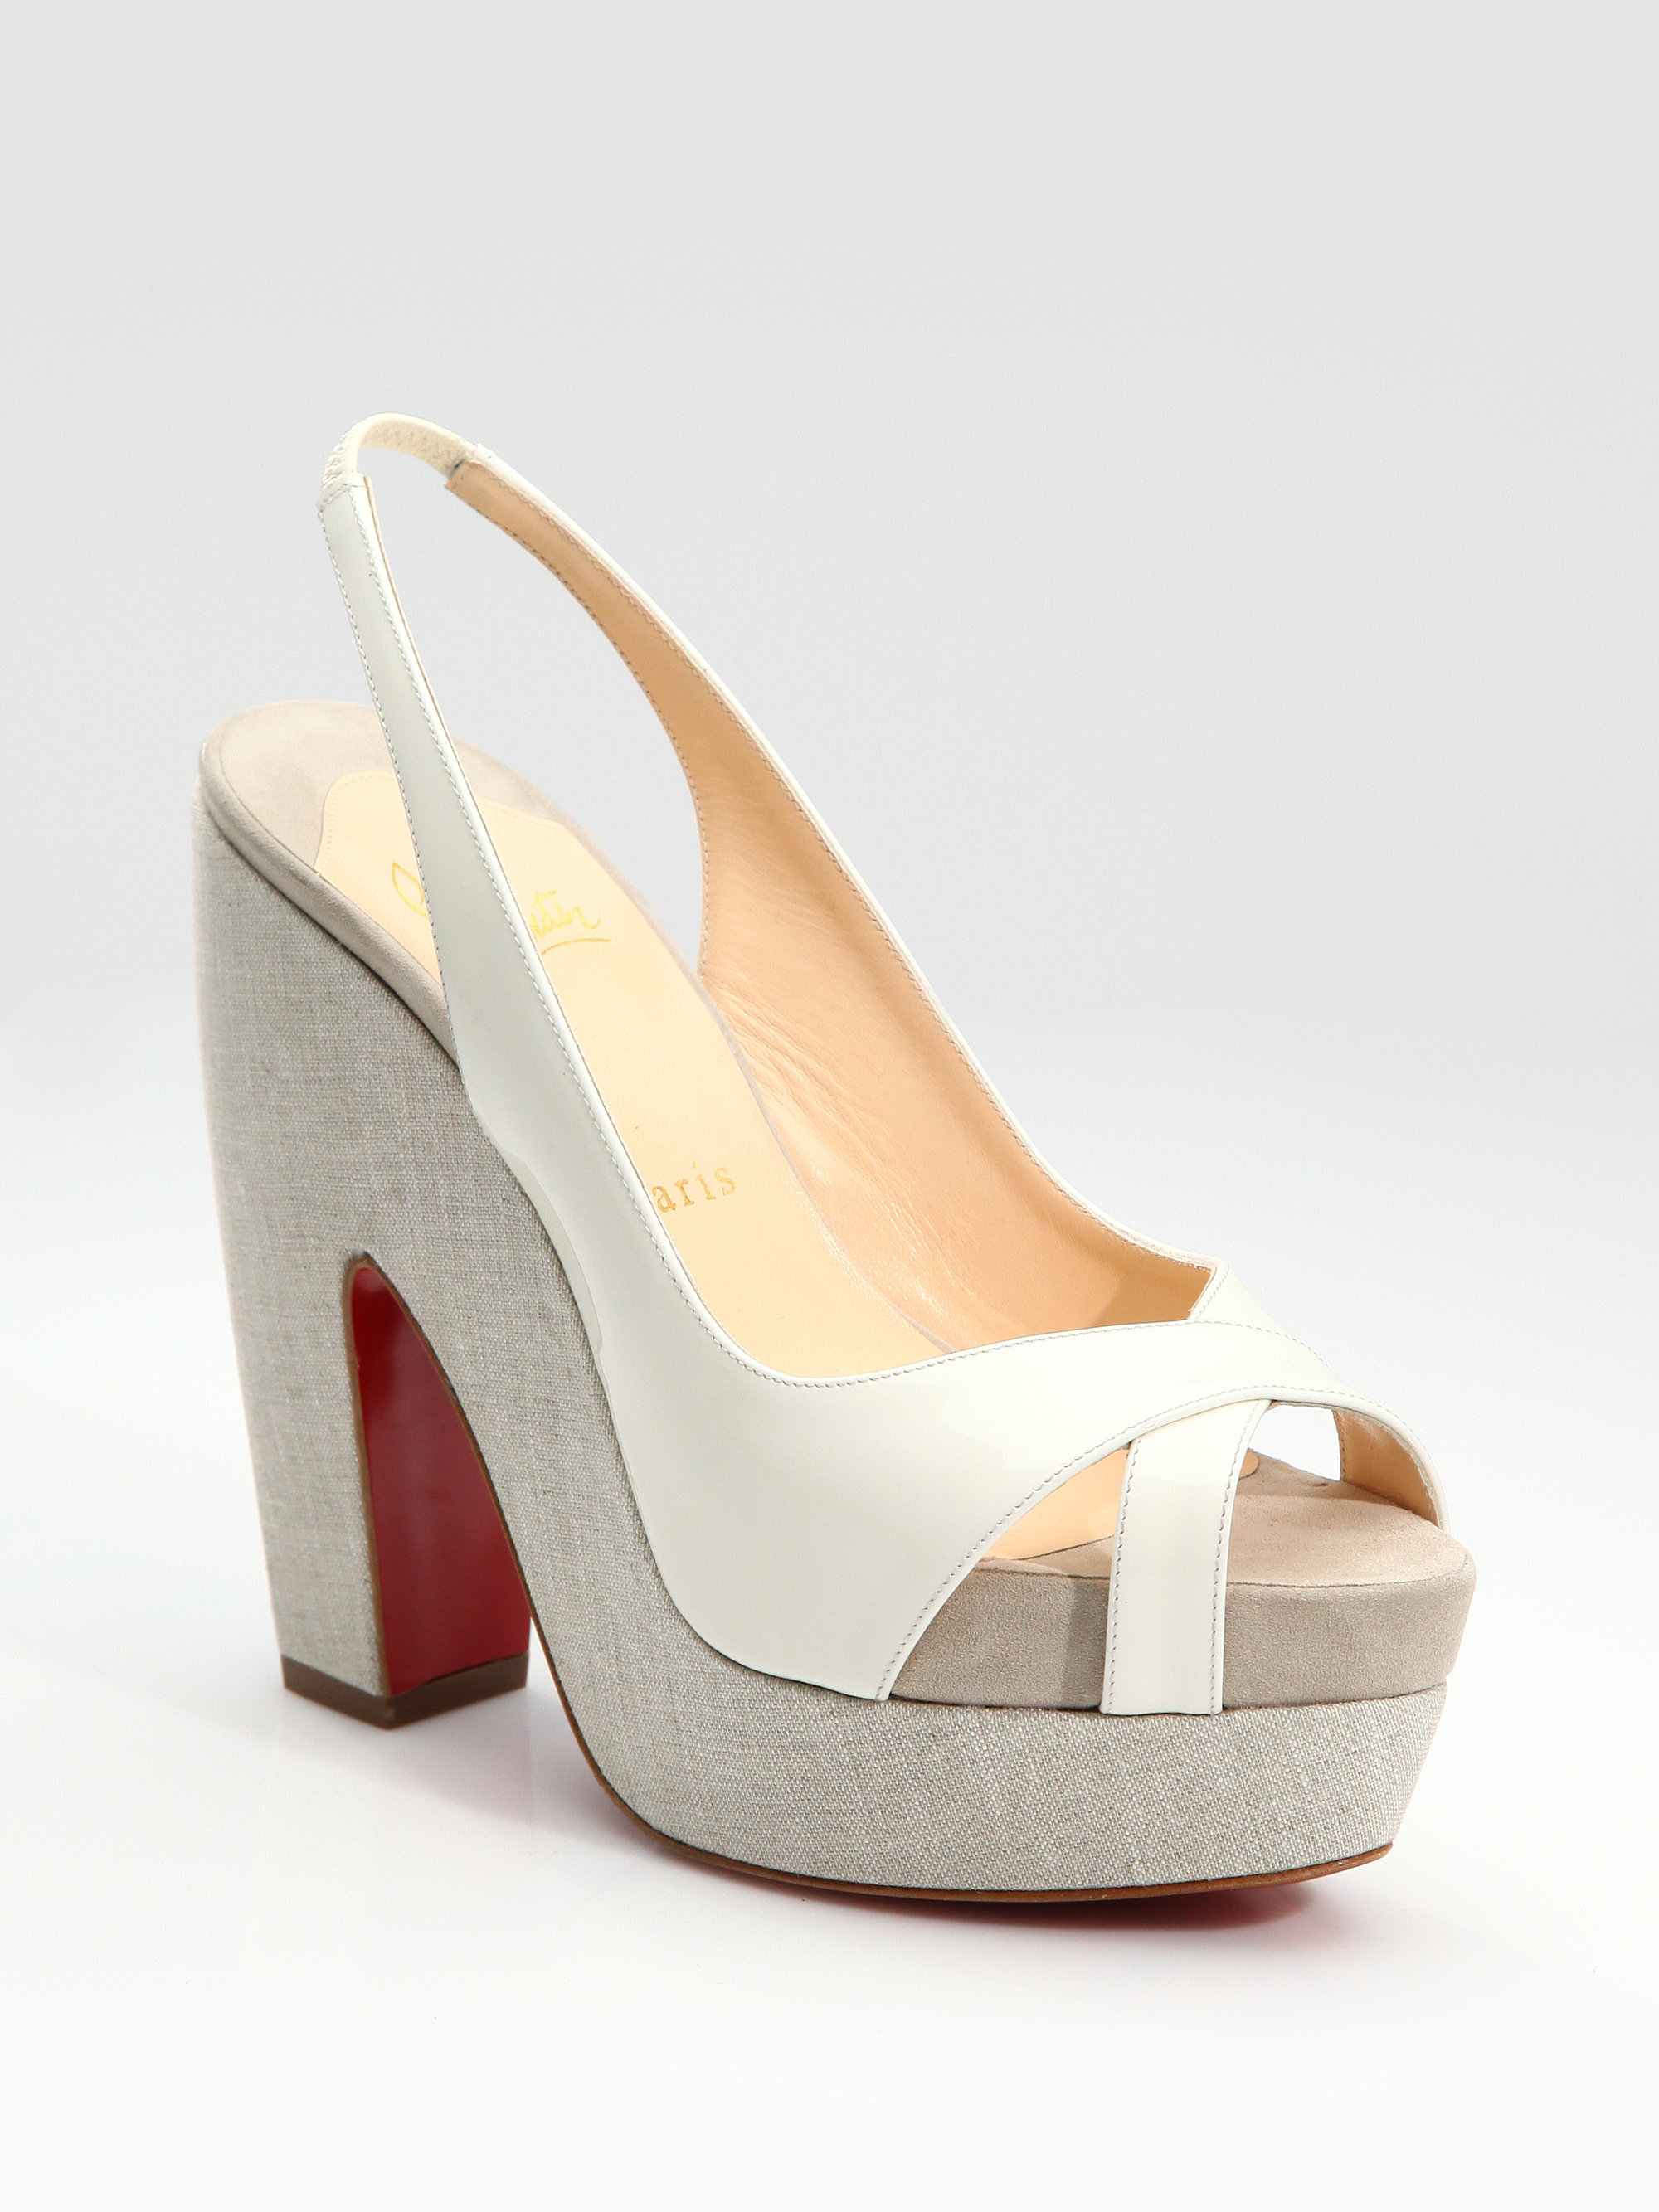 Christian louboutin Patent Leather Platform Slingback Sandals in ...